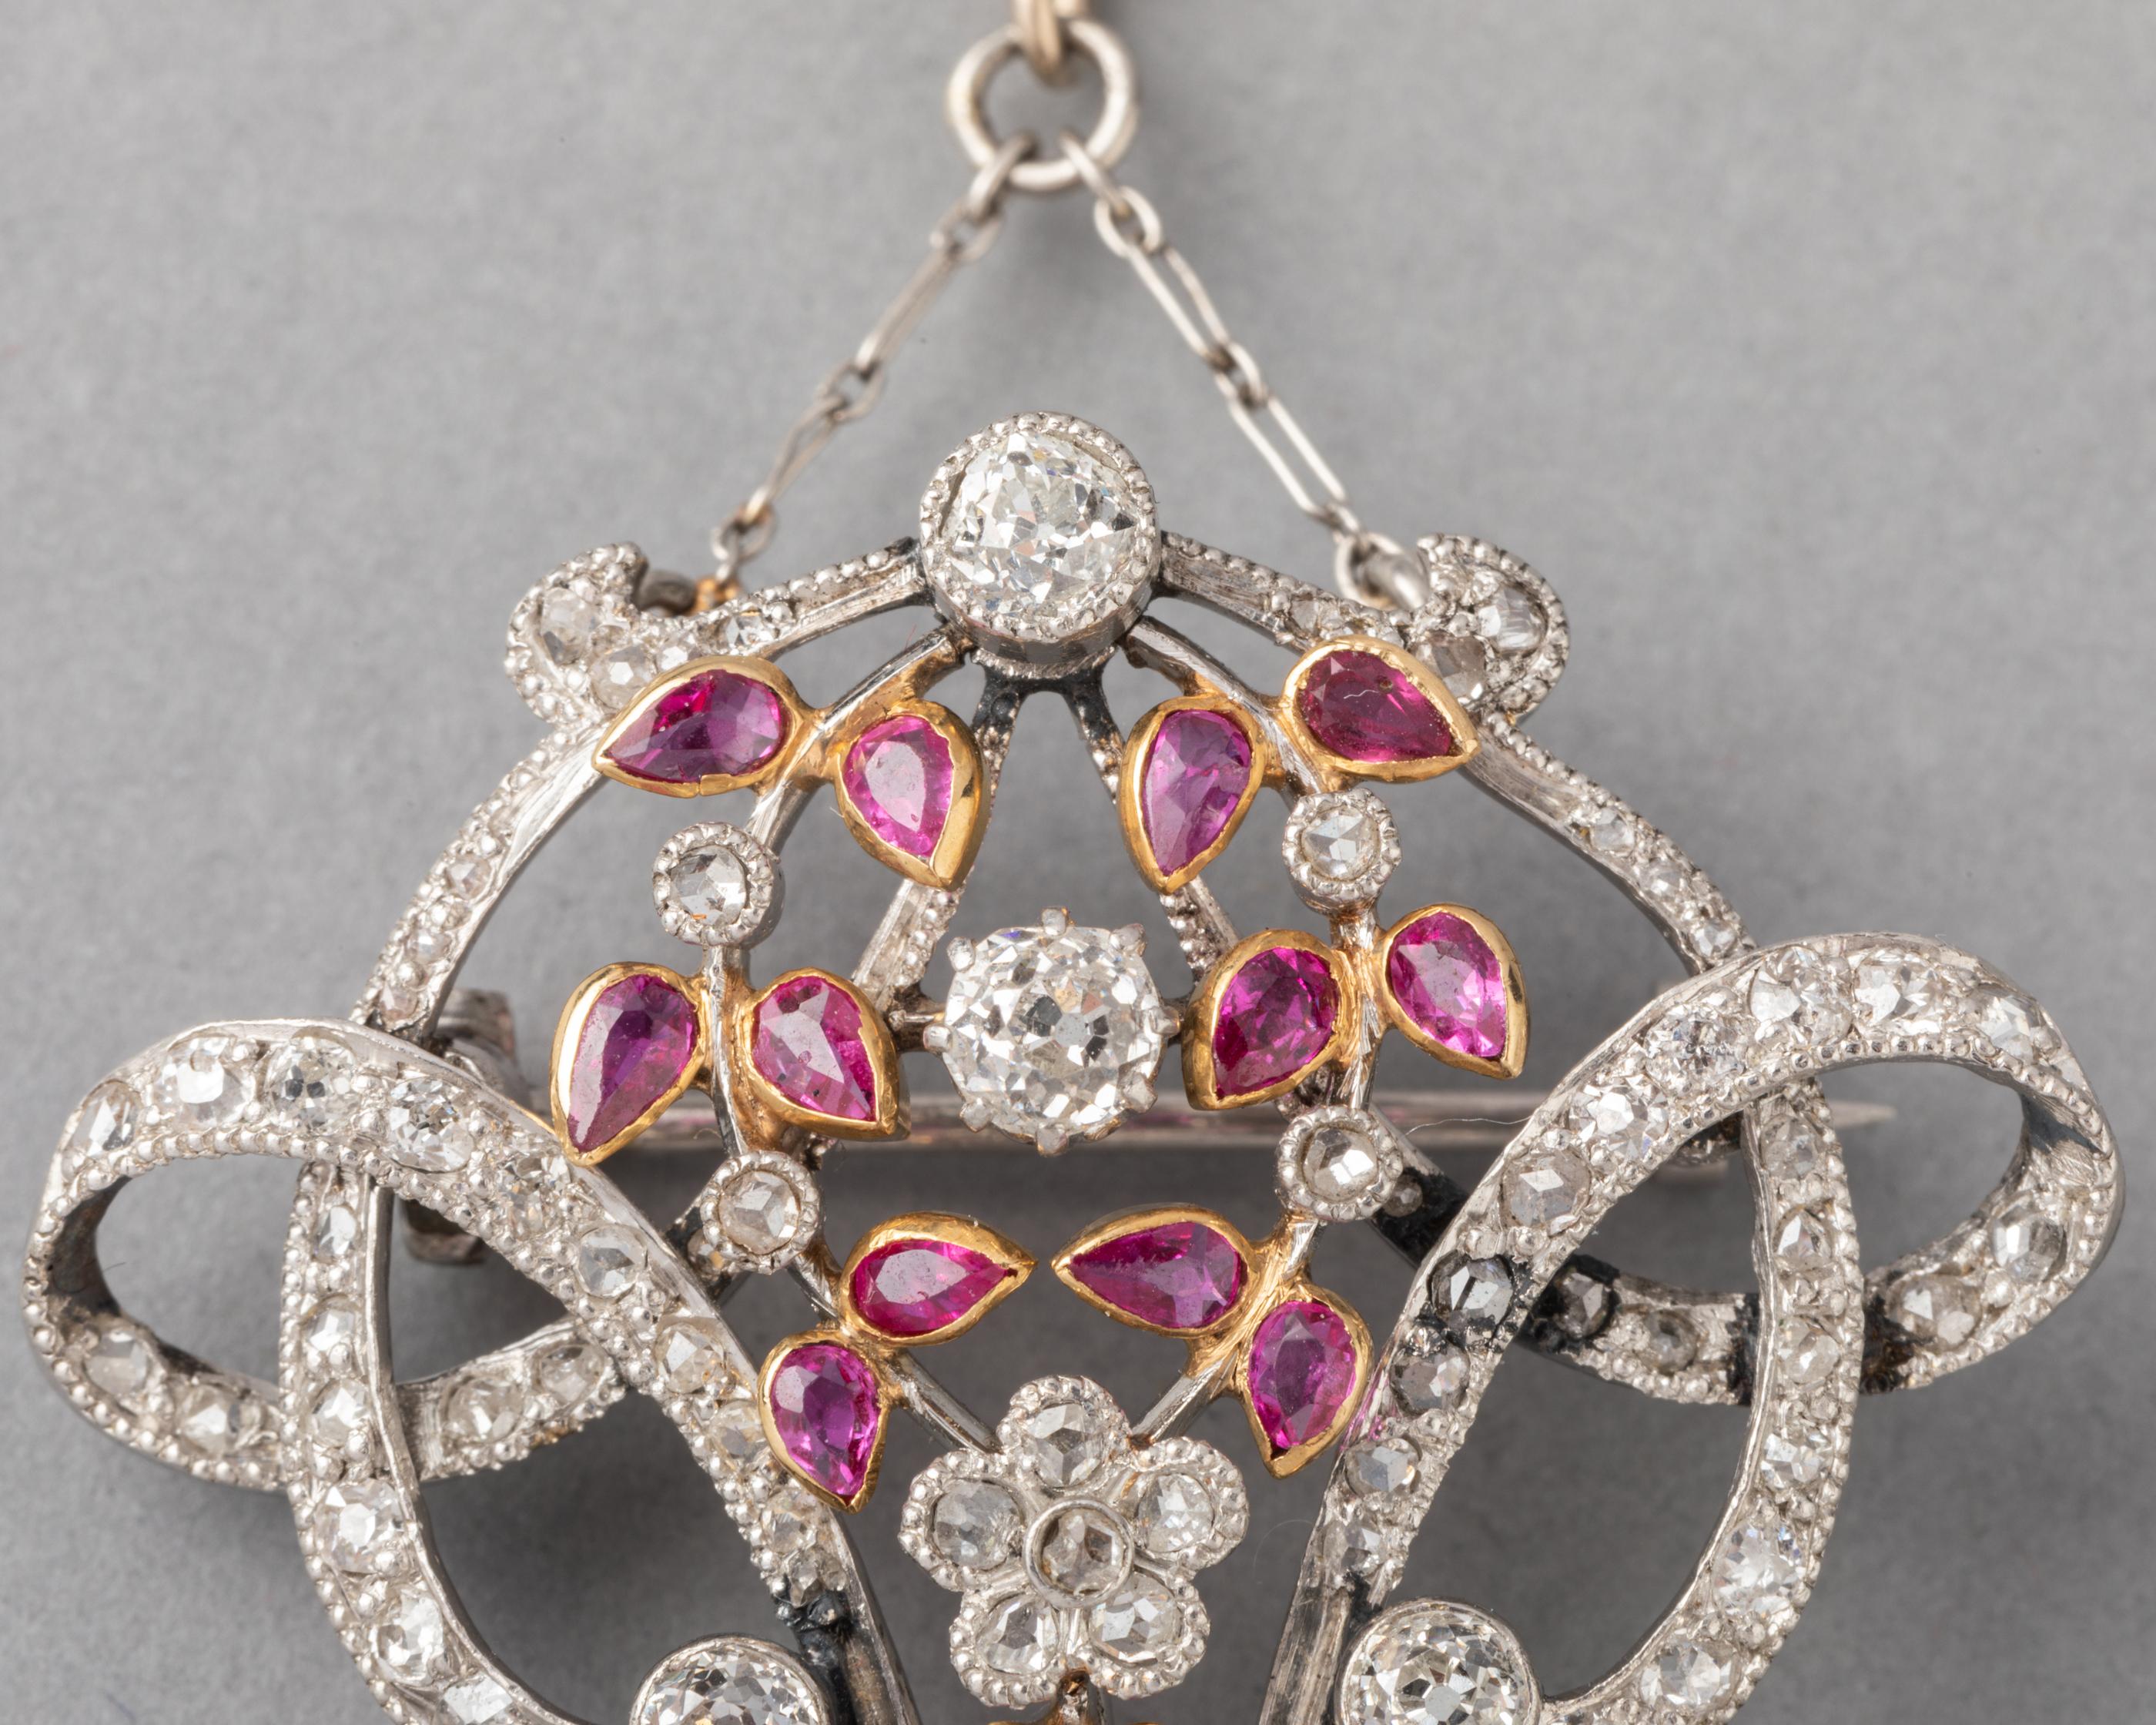 Old European Cut Antique Gold Diamonds and Rubies Pendant Necklace